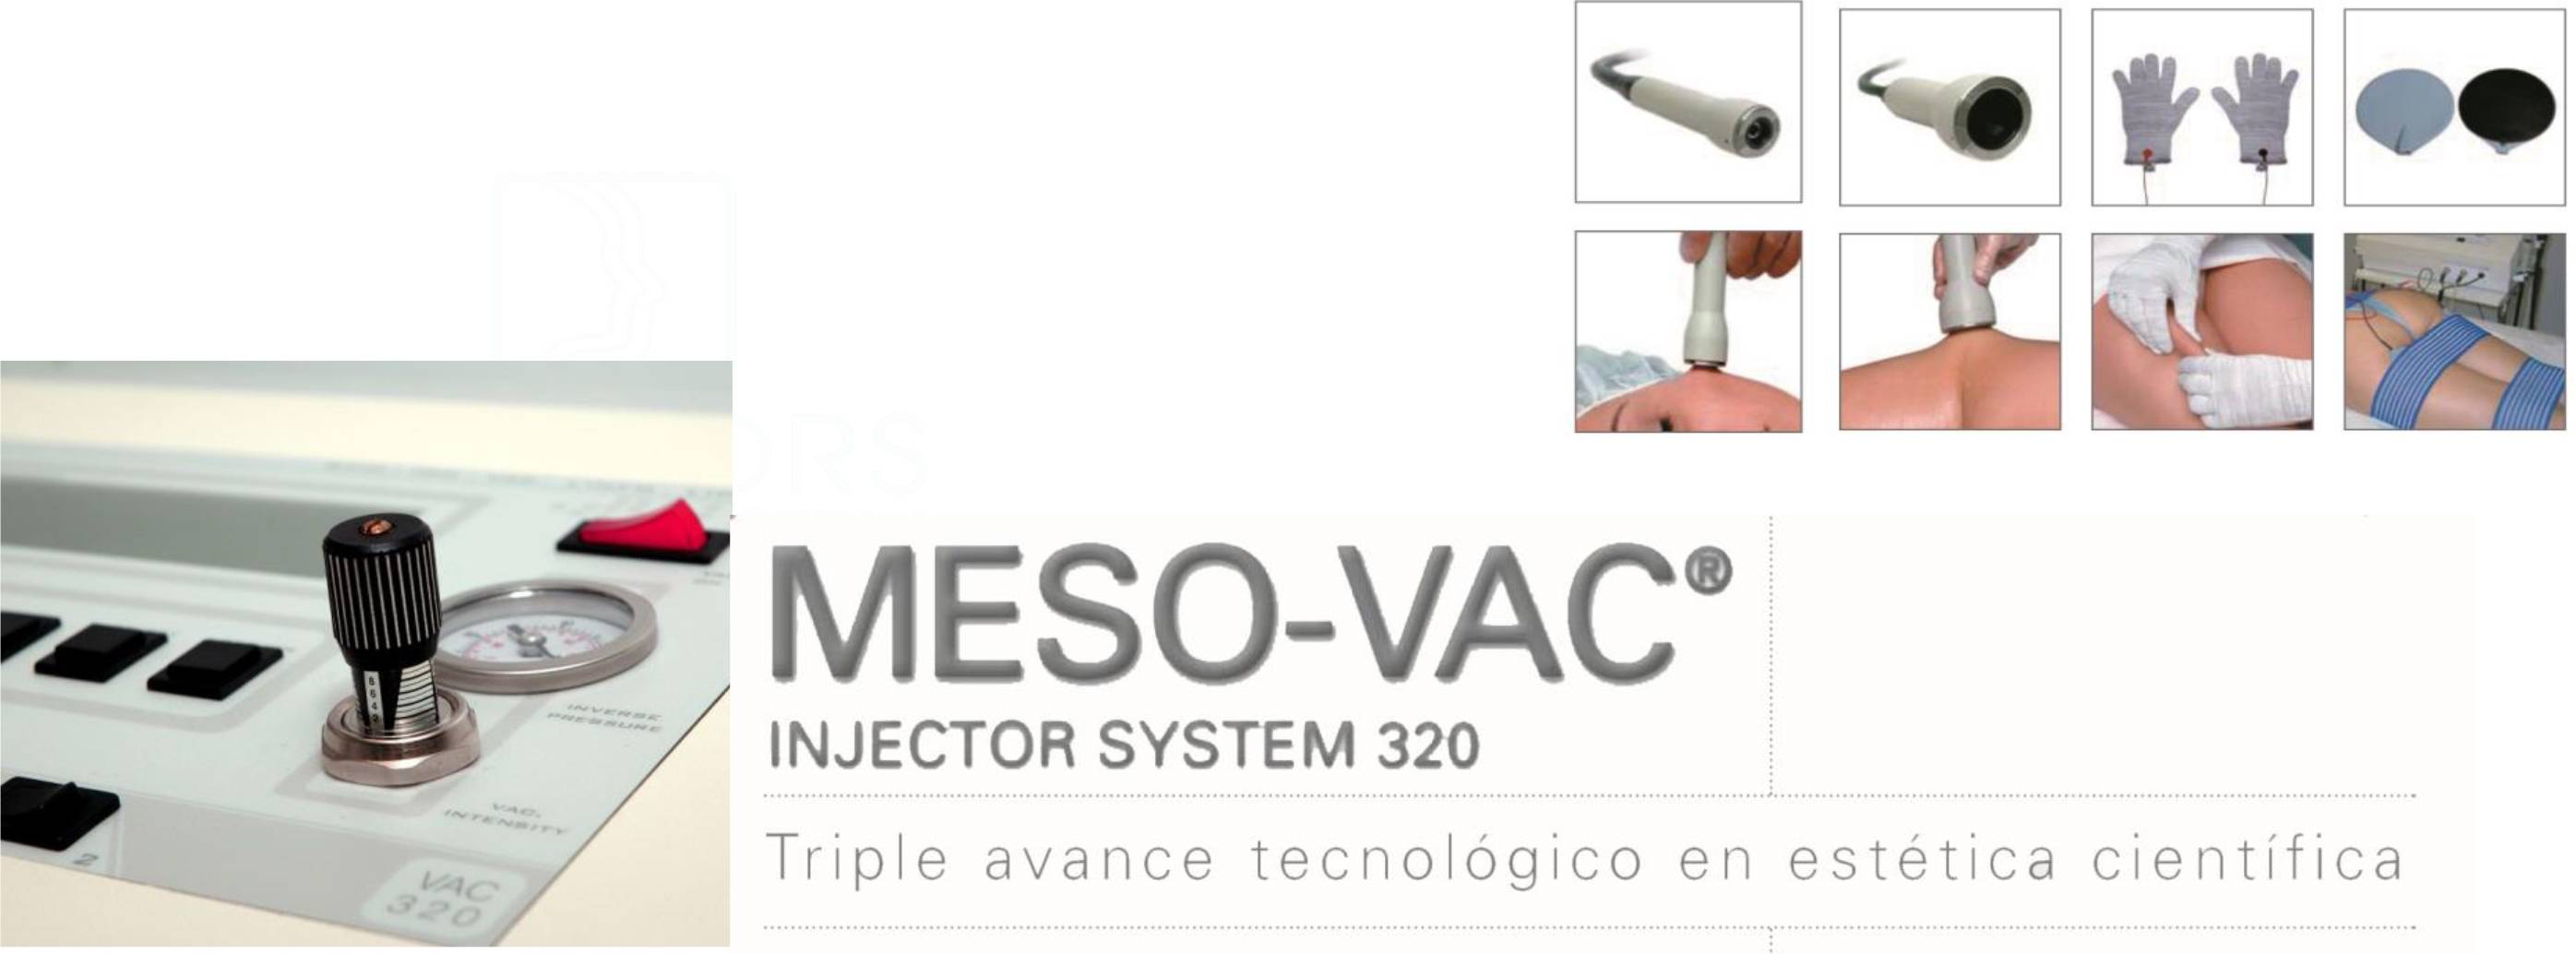 MESO-VAC INJECTOR SYSTEM (video)